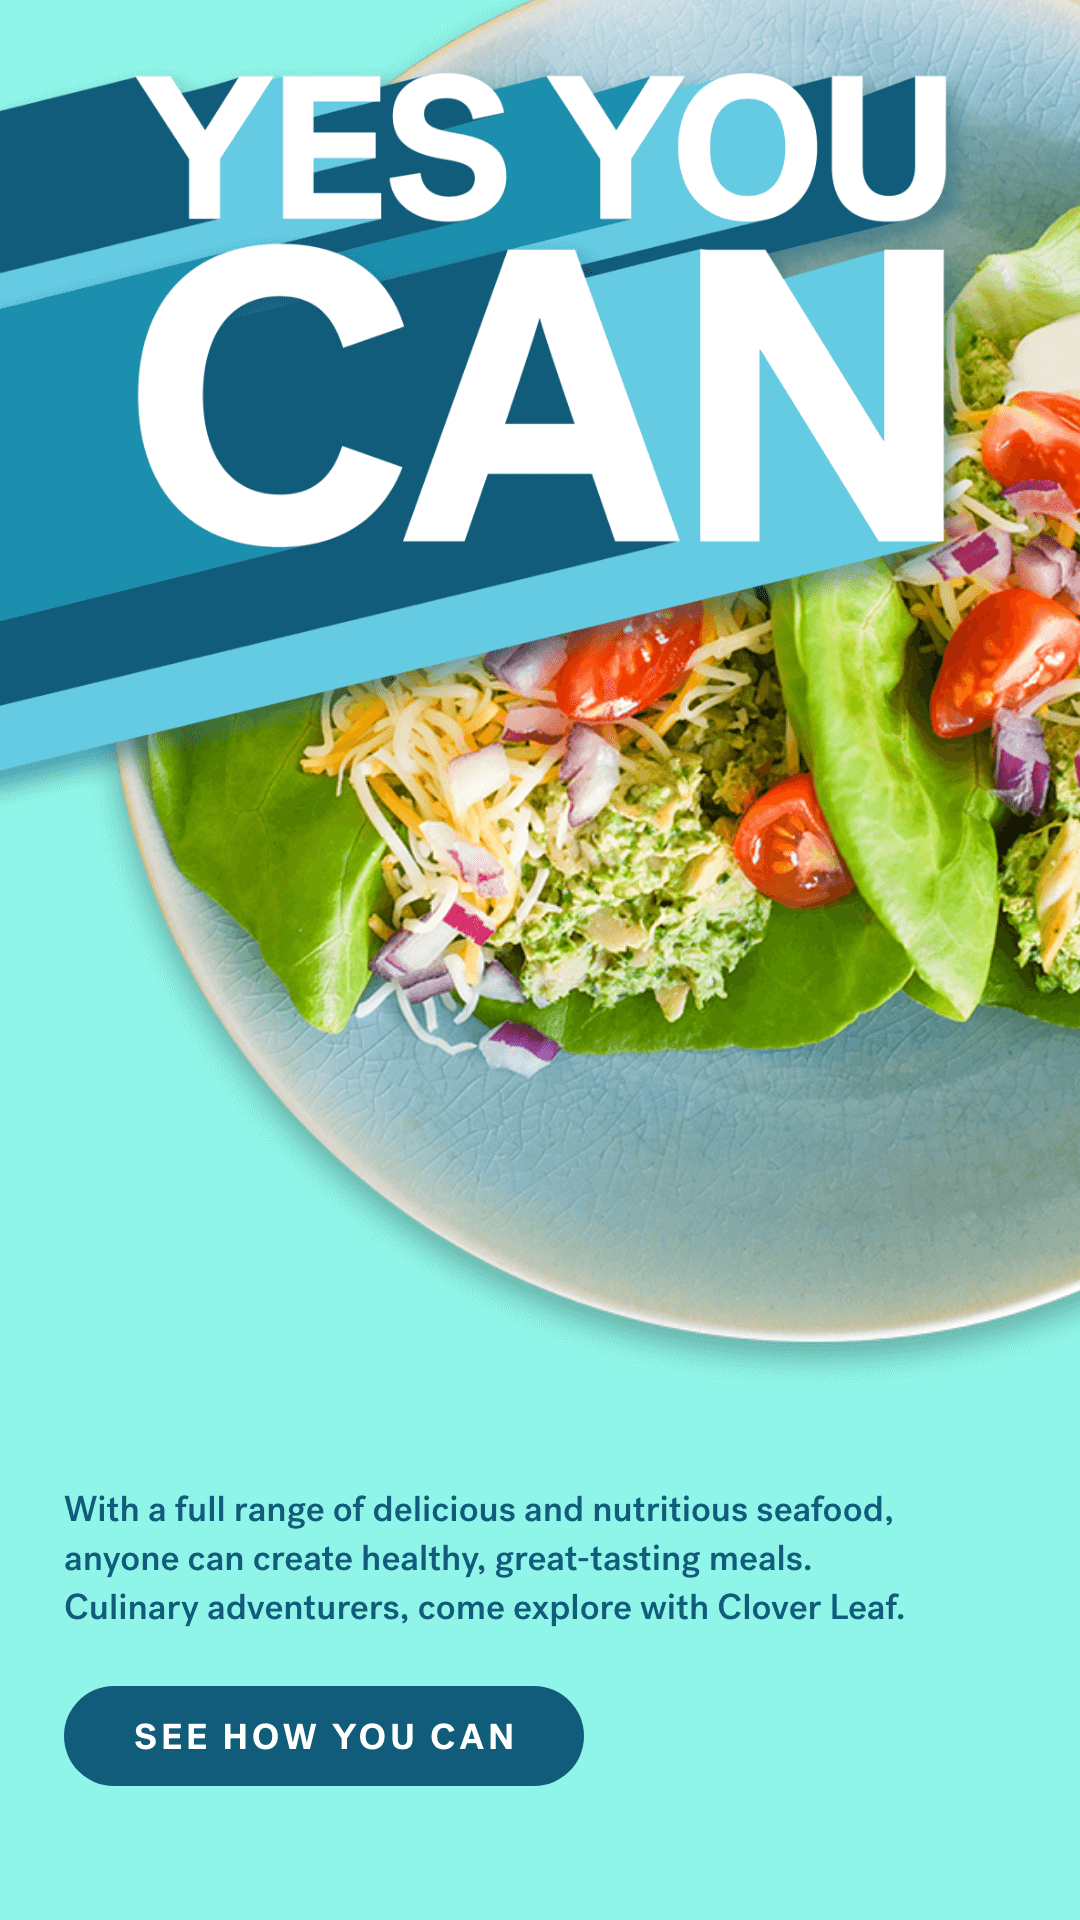 Yes You Can.  With a full range of delicious and nutritious seafood, anyone can create healthy, great-tasting meals. Culinary adventurers, come explore with Clover Leaf. See How You Can.